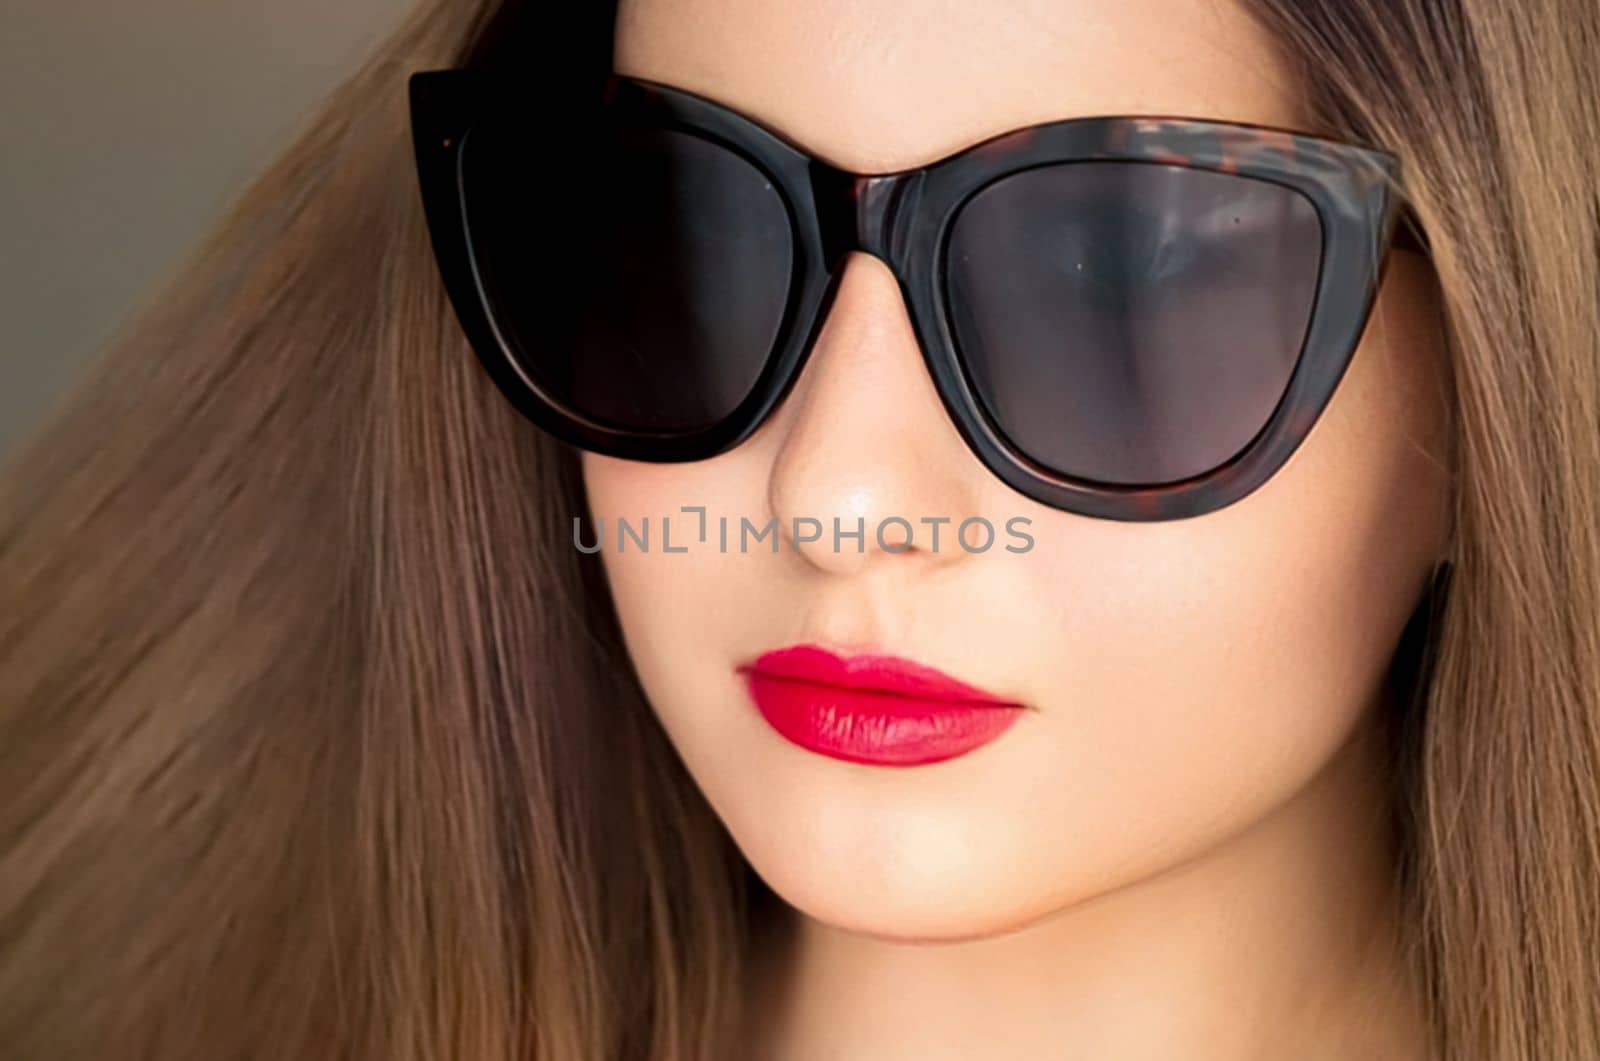 Beauty, fashion and style, face portrait of beautiful woman wearing stylish cat eye sunglasses and red lipstick make-up, luxury accessory and summer lifestyle, glamour and chic look by Anneleven